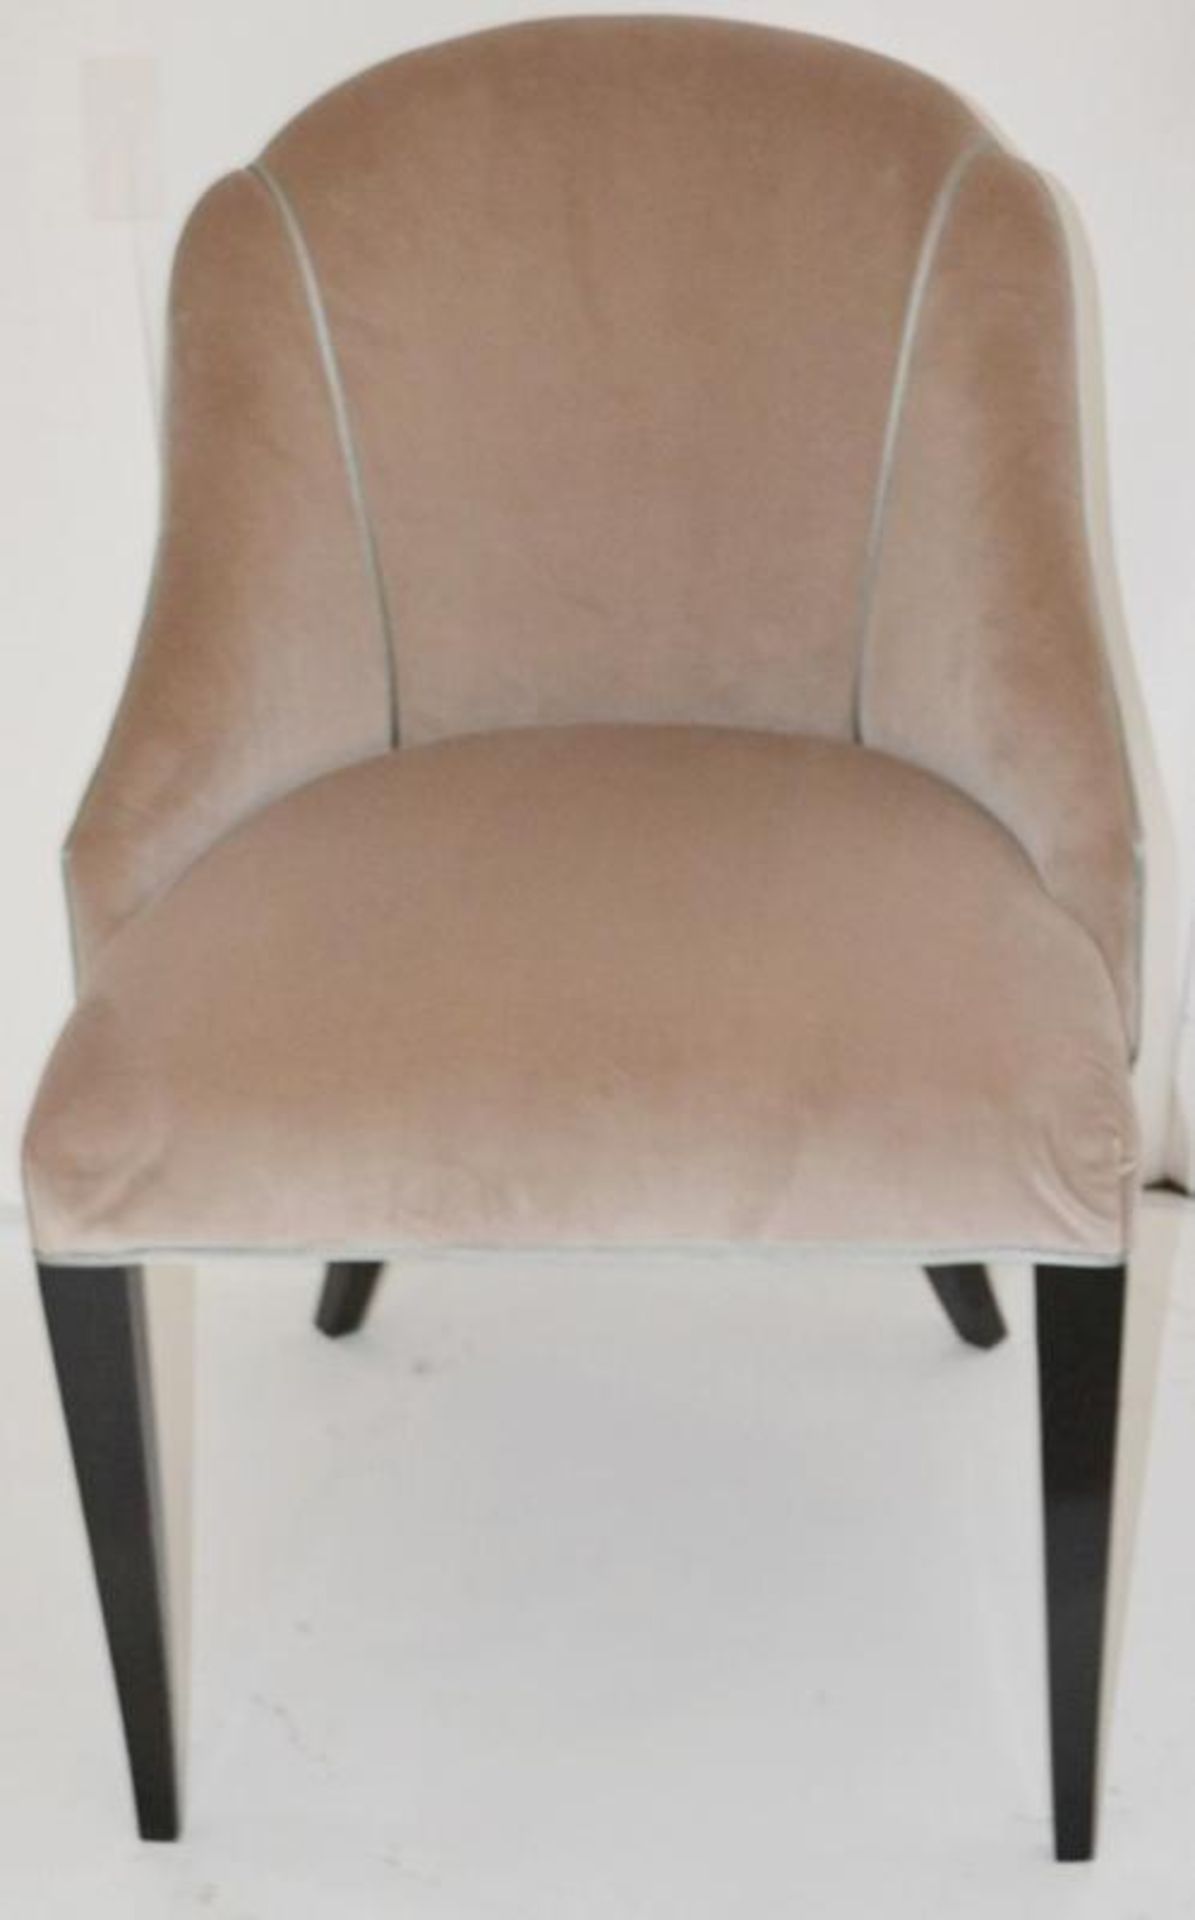 1 x REED &amp; RACKSTRAW "Cloud" Velvet Upholstered Handcrafted Chair - Dimensions: H87 x W58 x D5 - Image 9 of 12